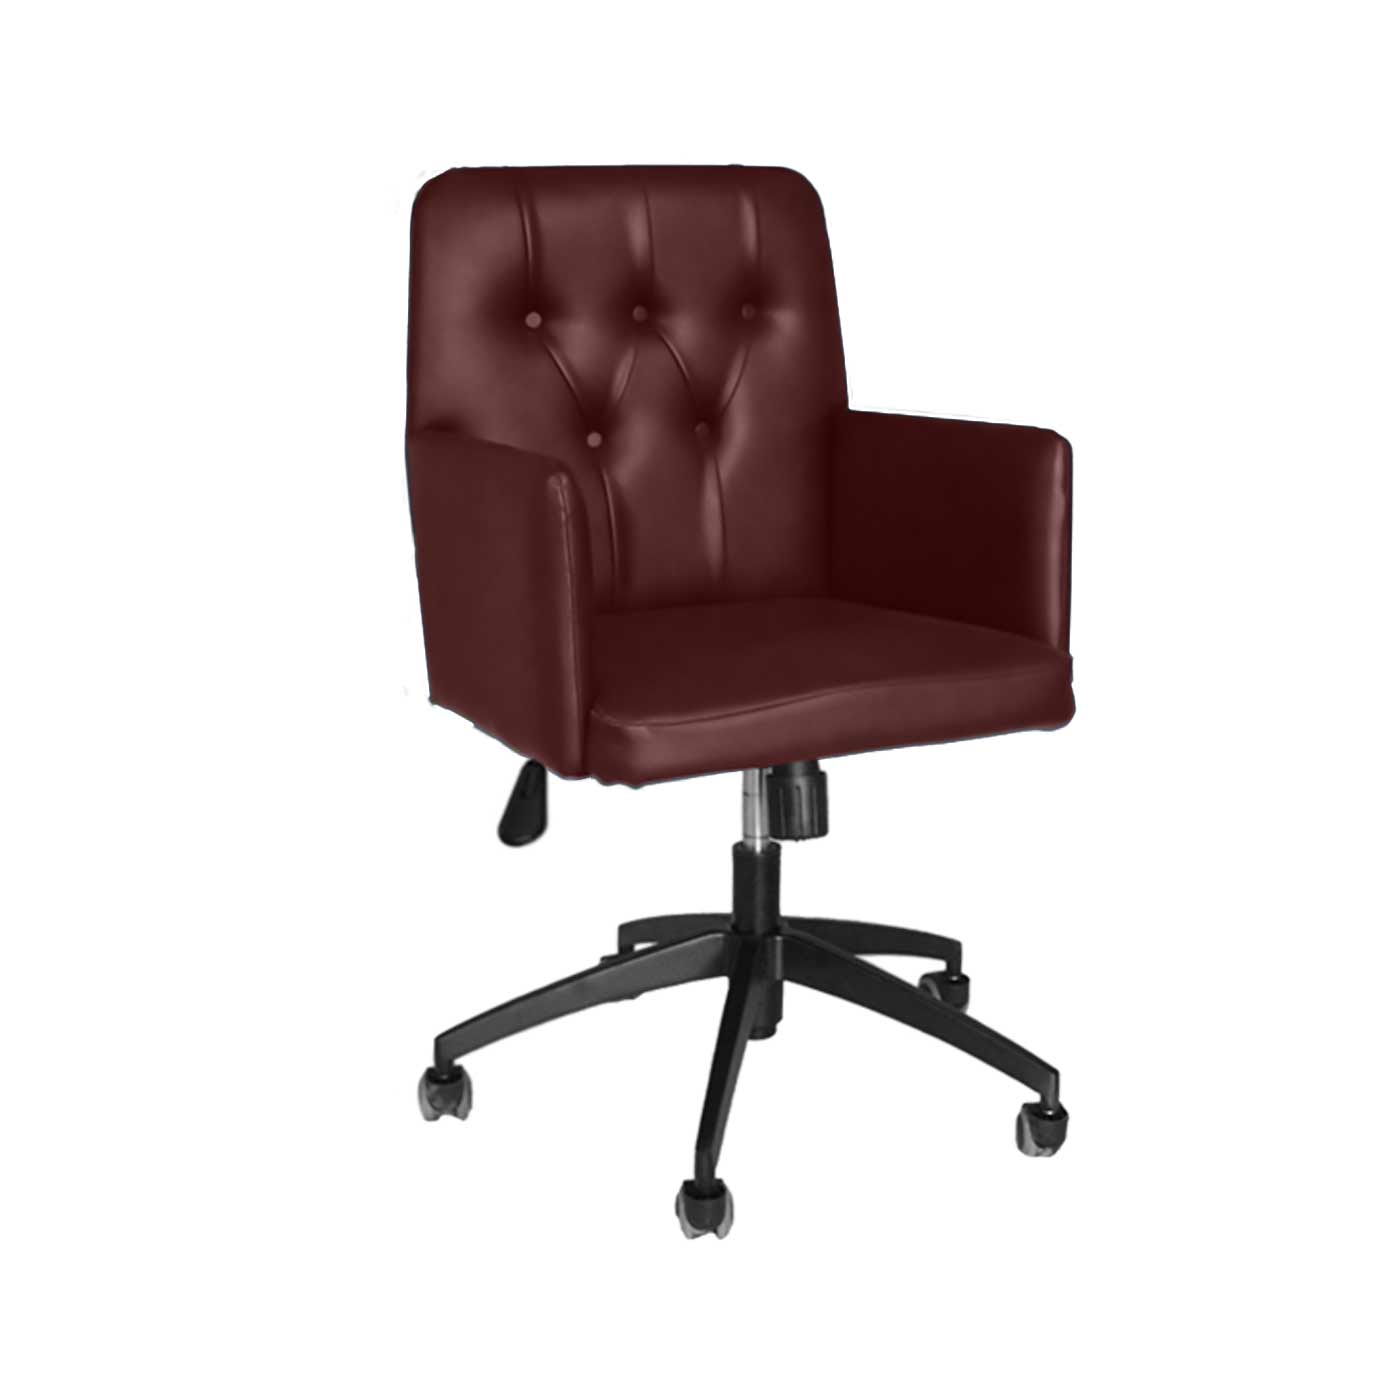 Sheffield Faux Leather Work Chair